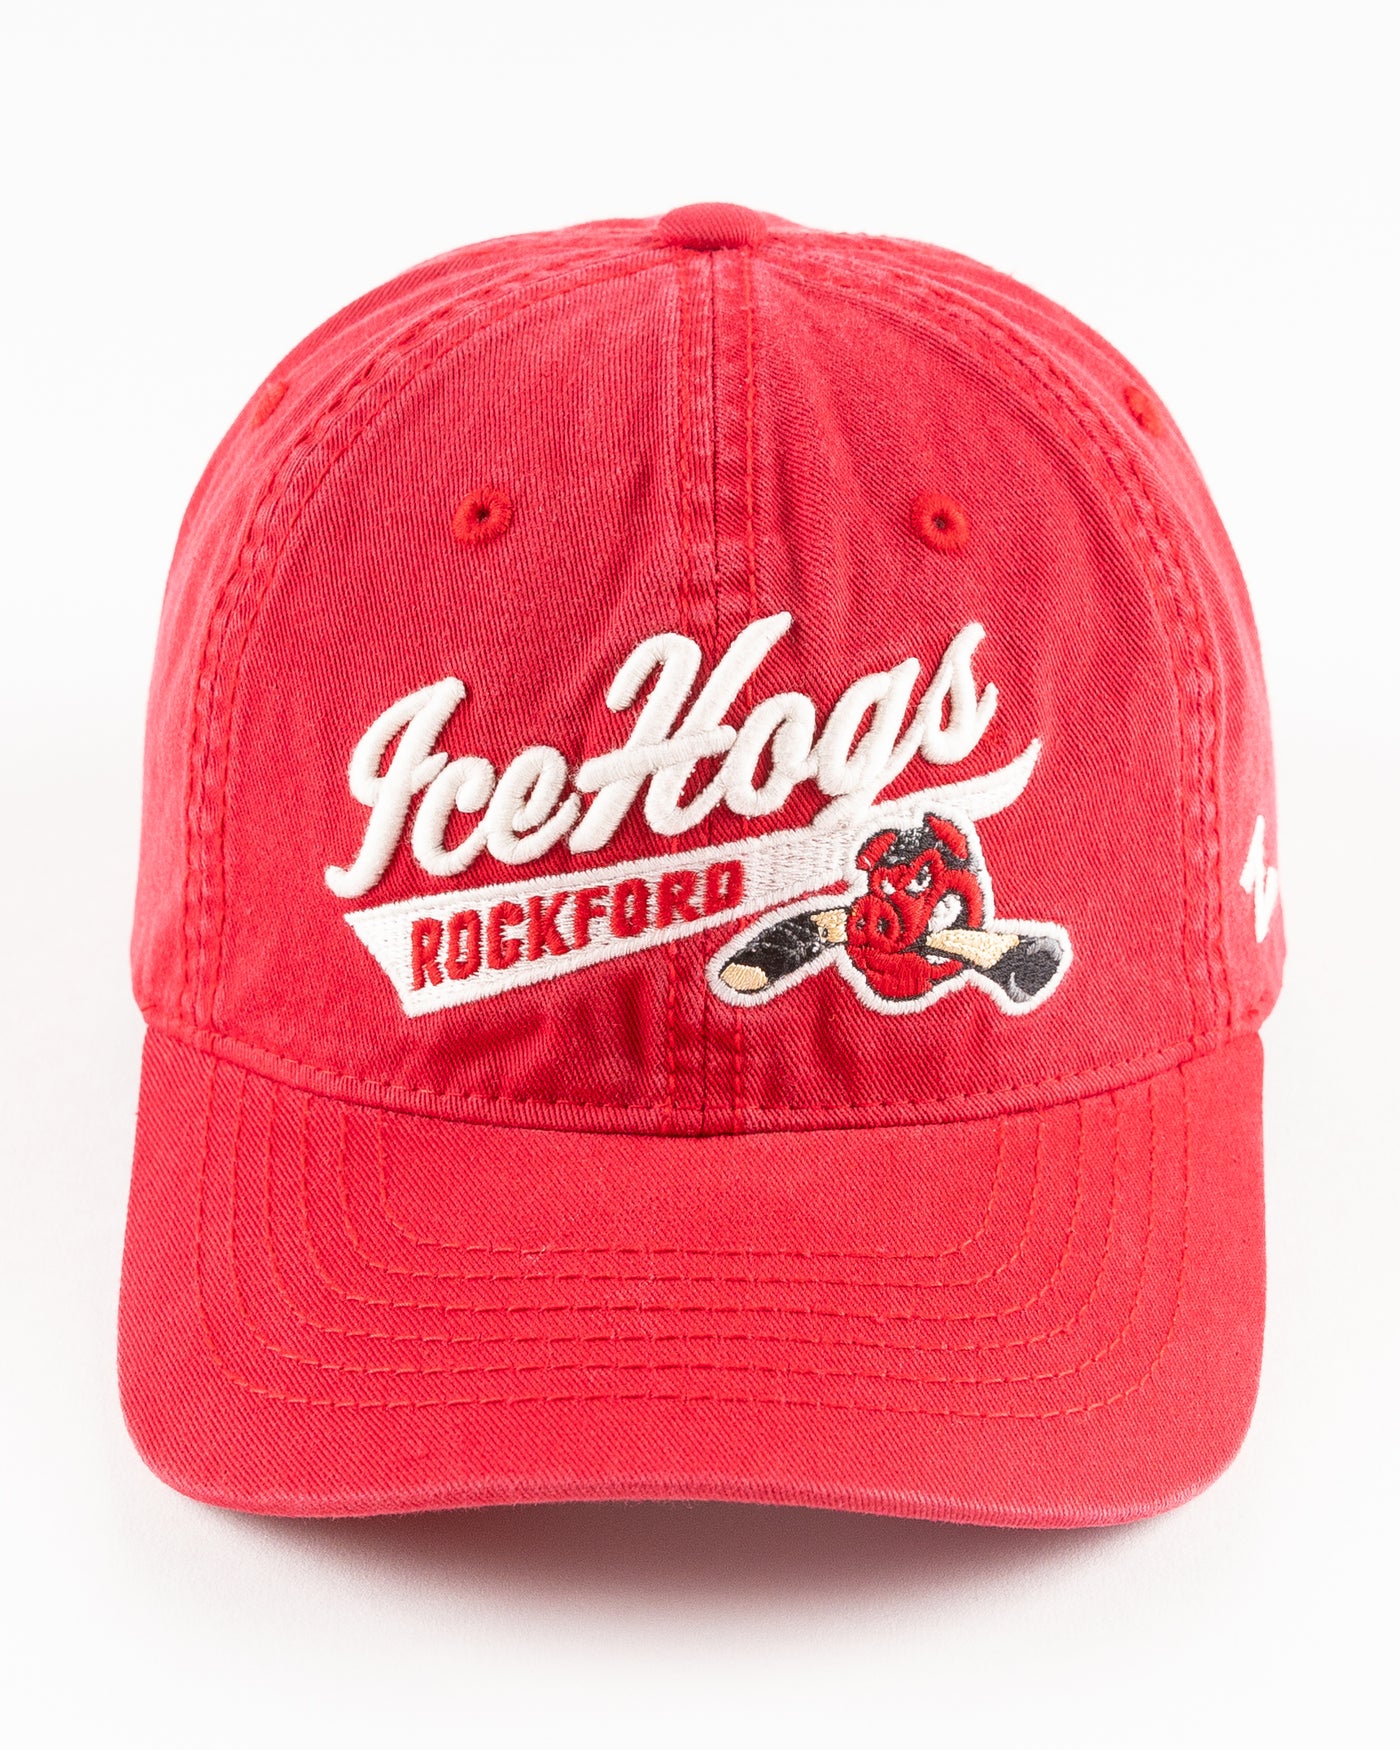 red adjustable Rockford IceHogs cap with wordmark - front lay flat